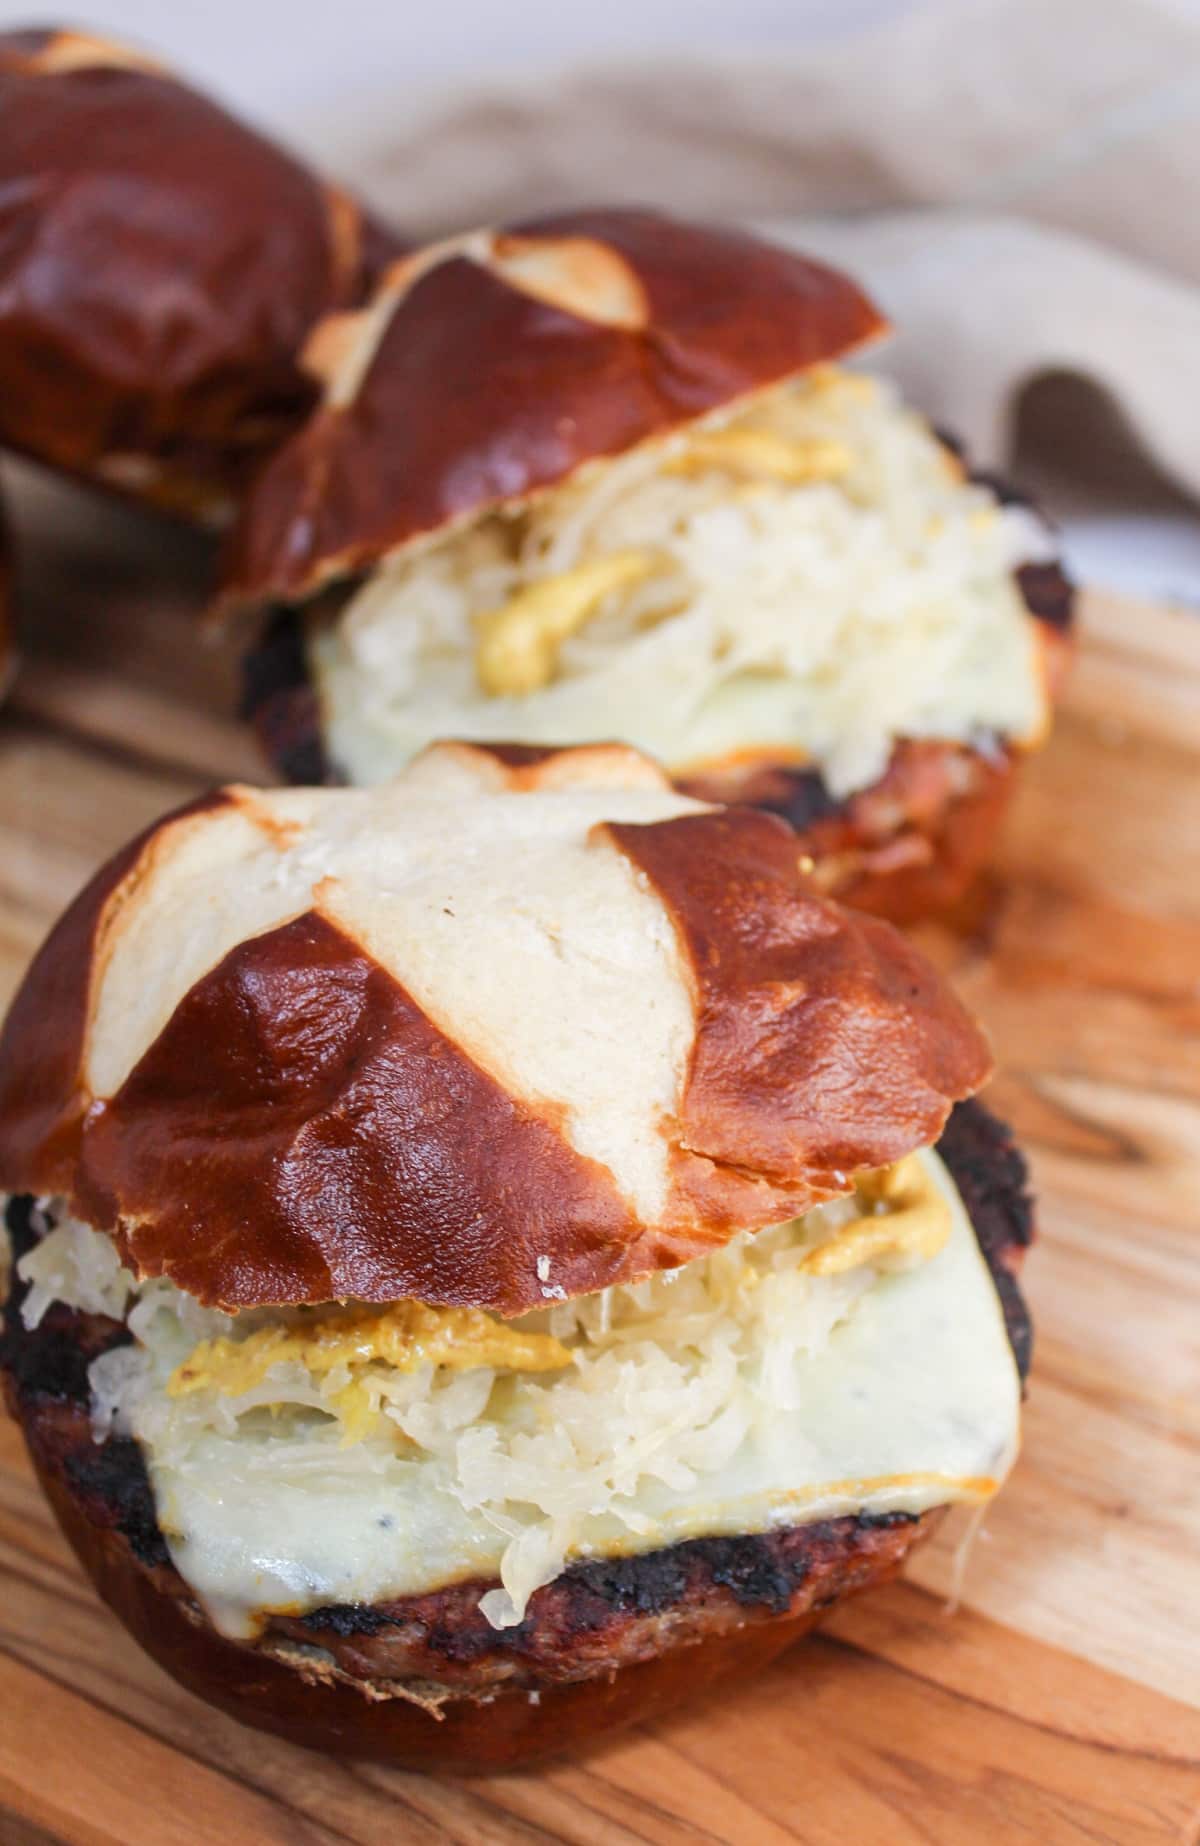 grilled brat pattie on a pretzel roll. The meat is cooked and topped with melted cheese, mustard, and sauerkraut.